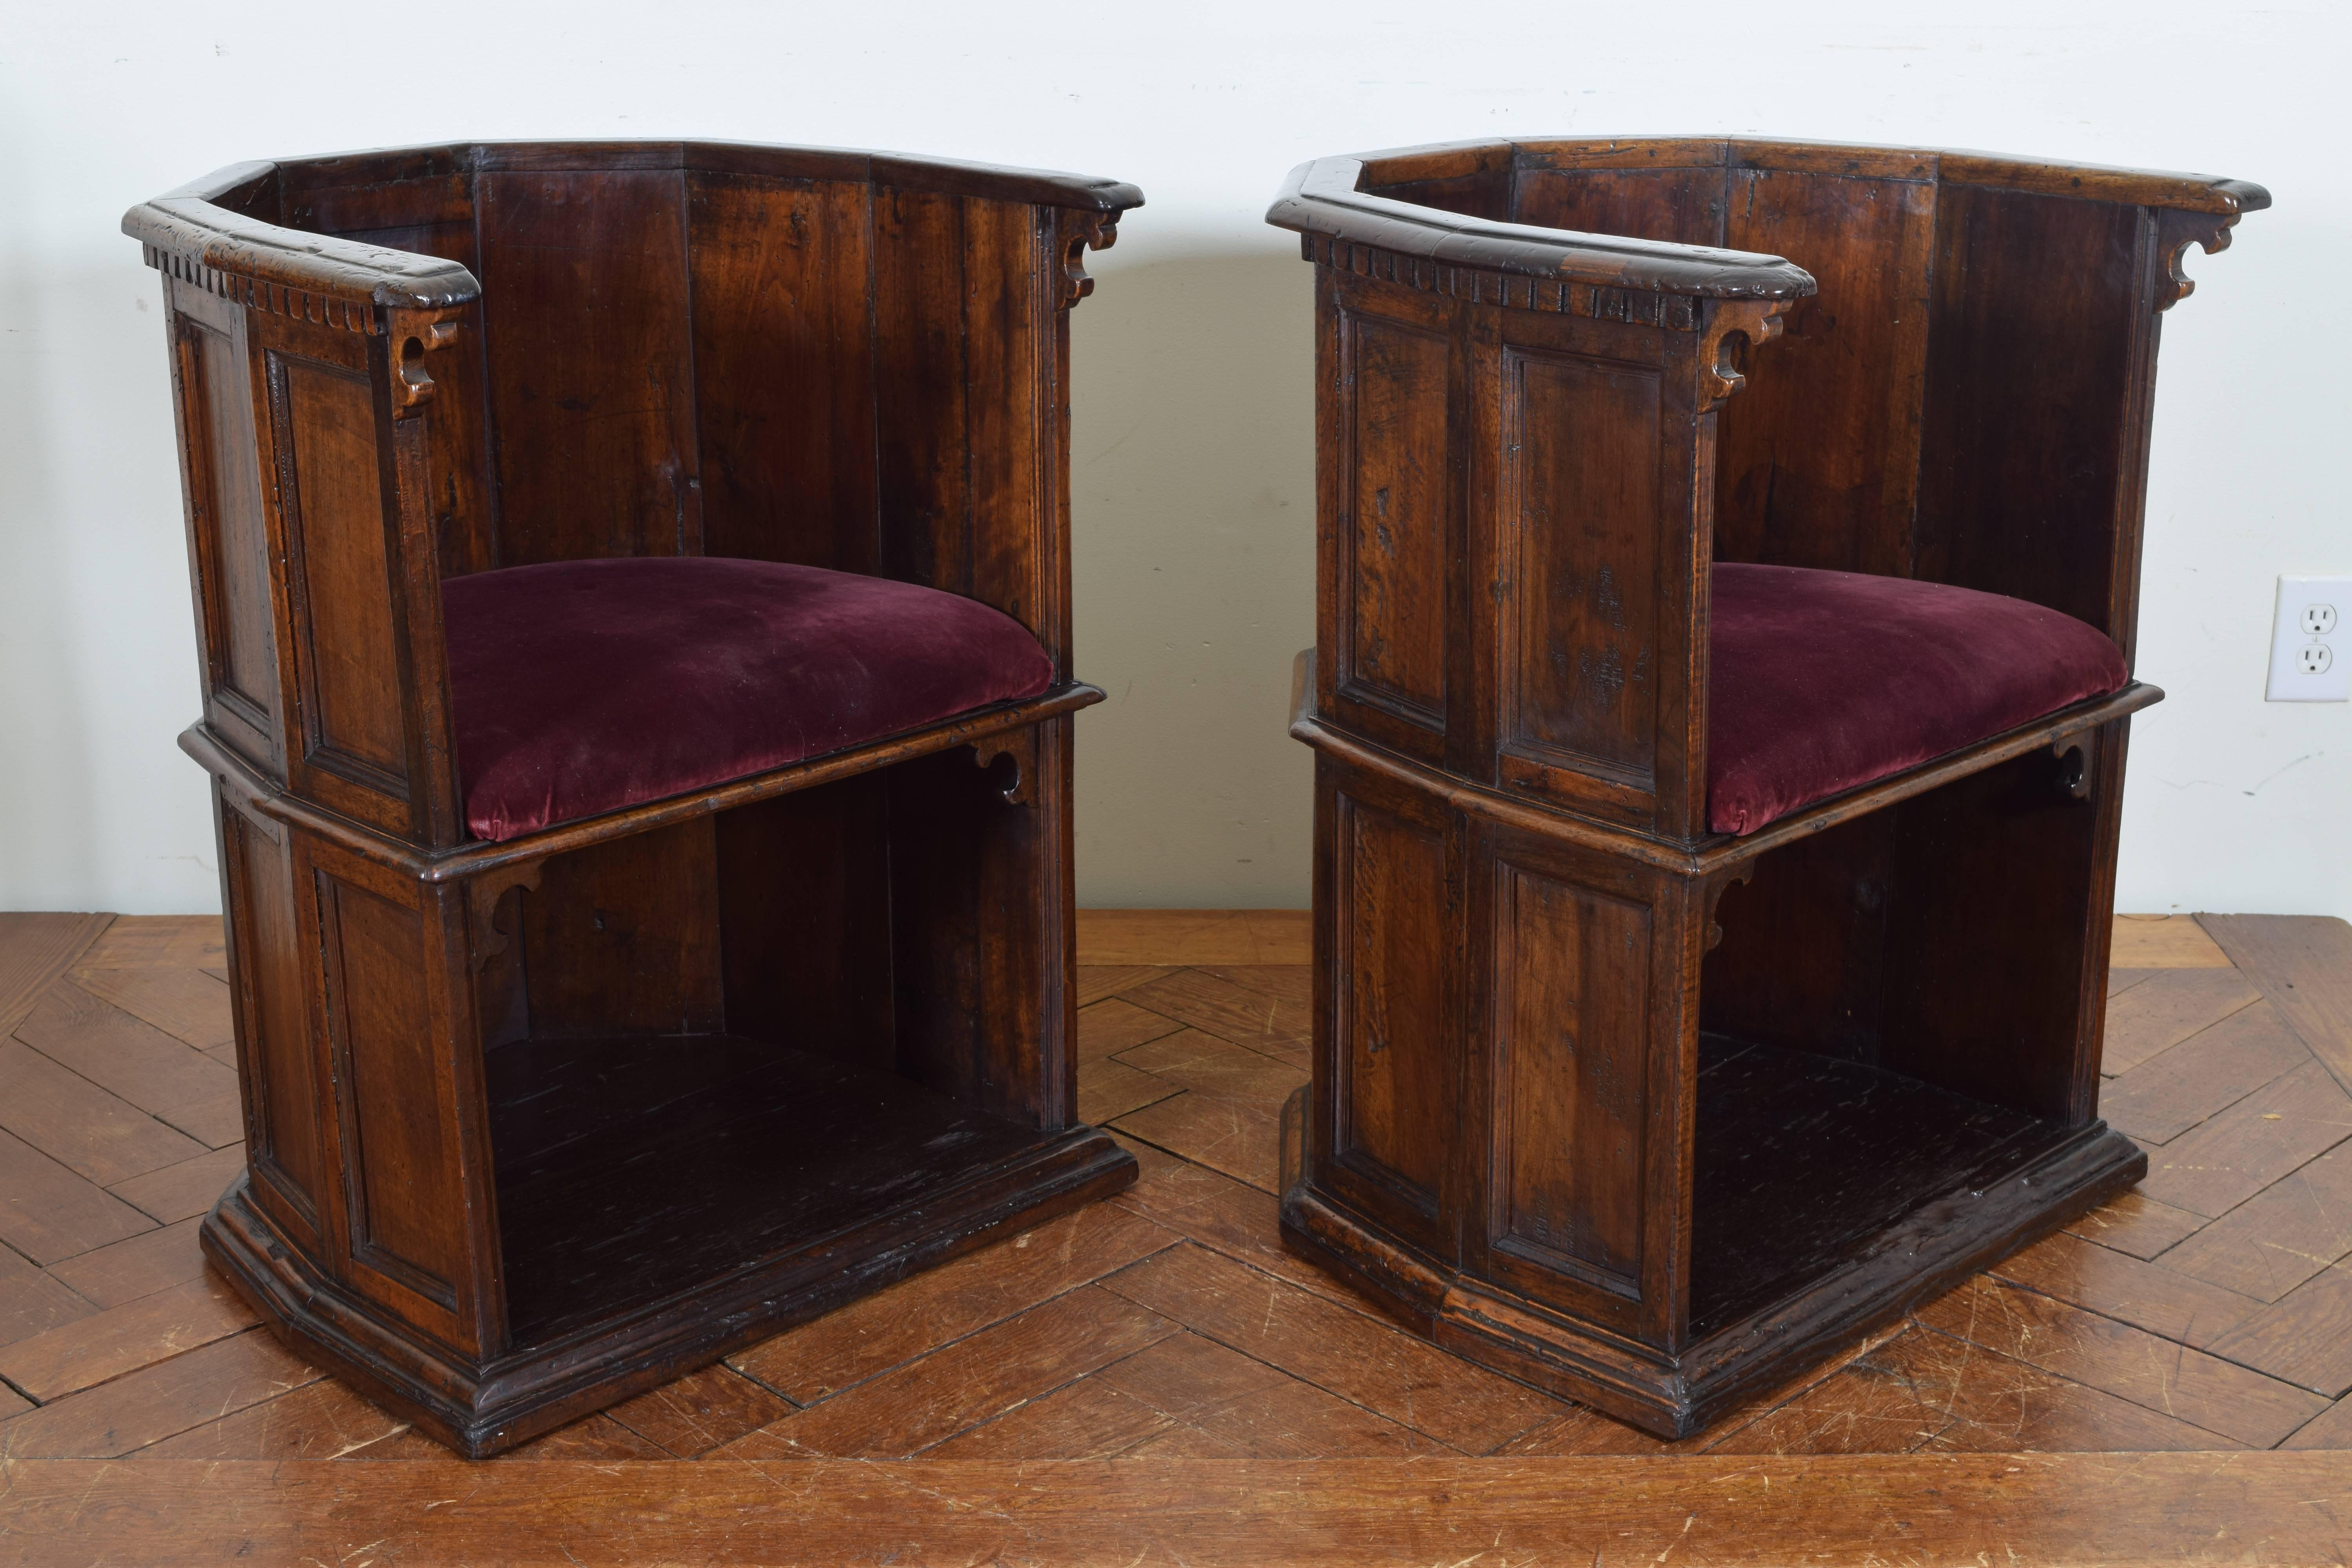 Pair of Italian Late Renaissance walnut chairs of hexagonal form with paneled exterior and carved armrests, the seats above platforms, formerly sold by French & Co., New York.  Scranni plural of Scranno, borrowing from Lombardic skranna (“bench”). 